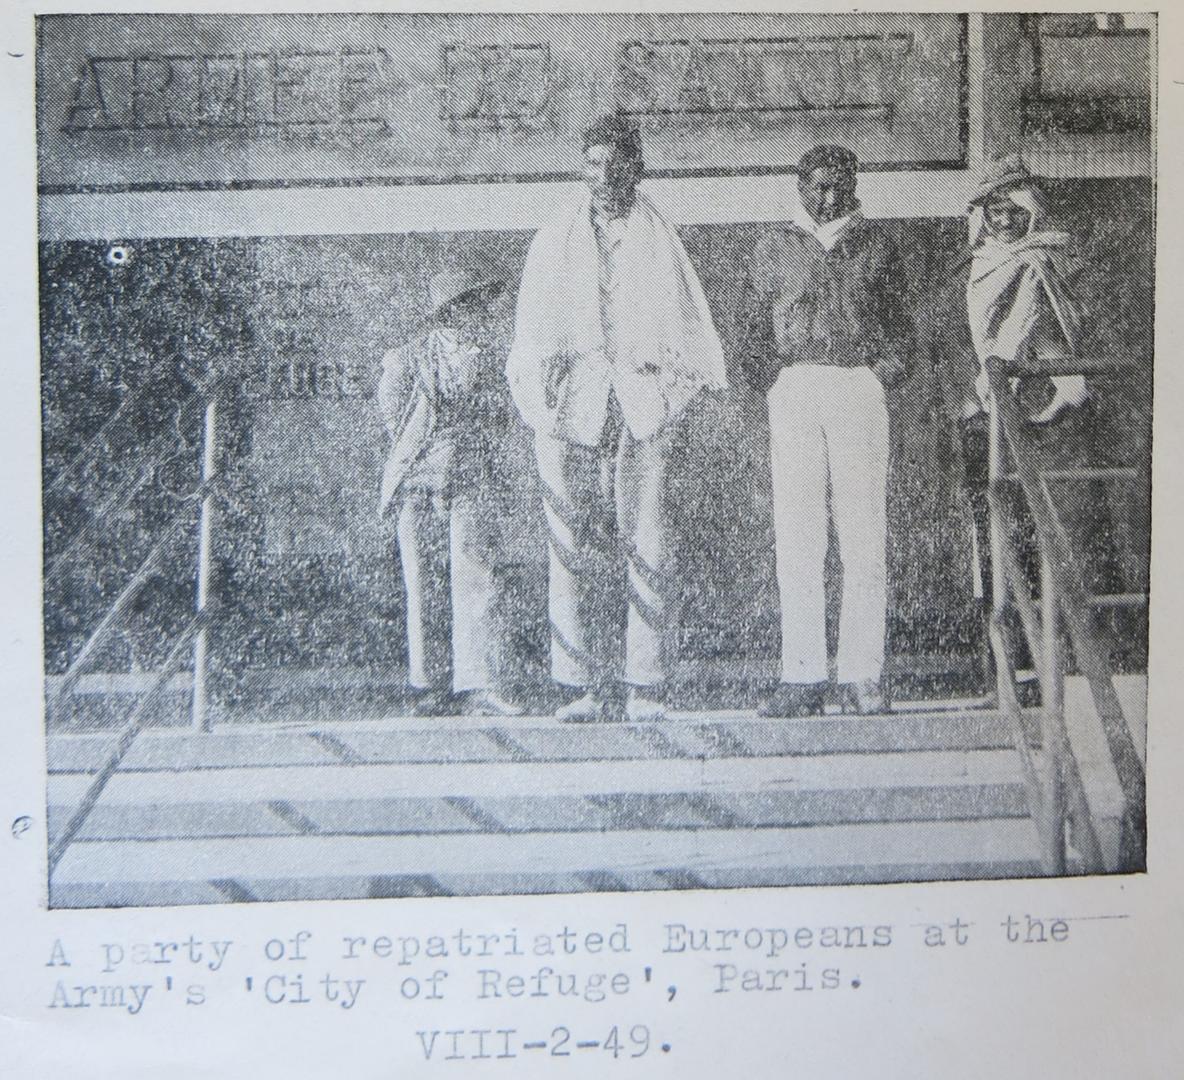 Photograph of former prisoners in French Guiana repatriated to Europe